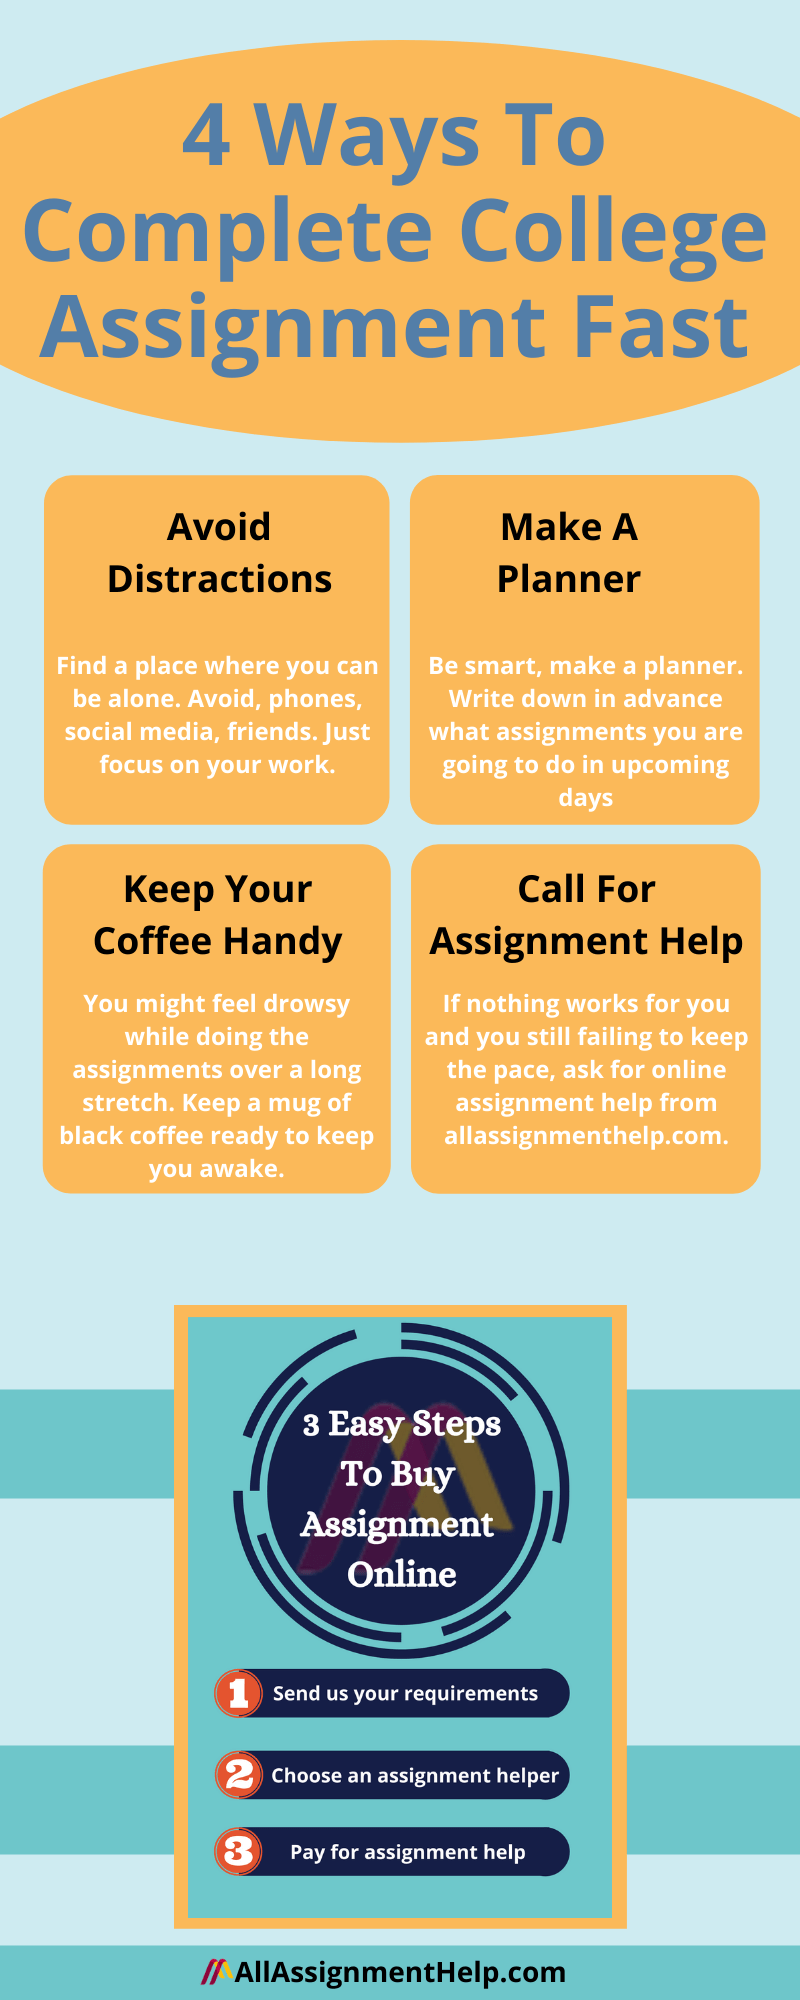 College-assignment-help